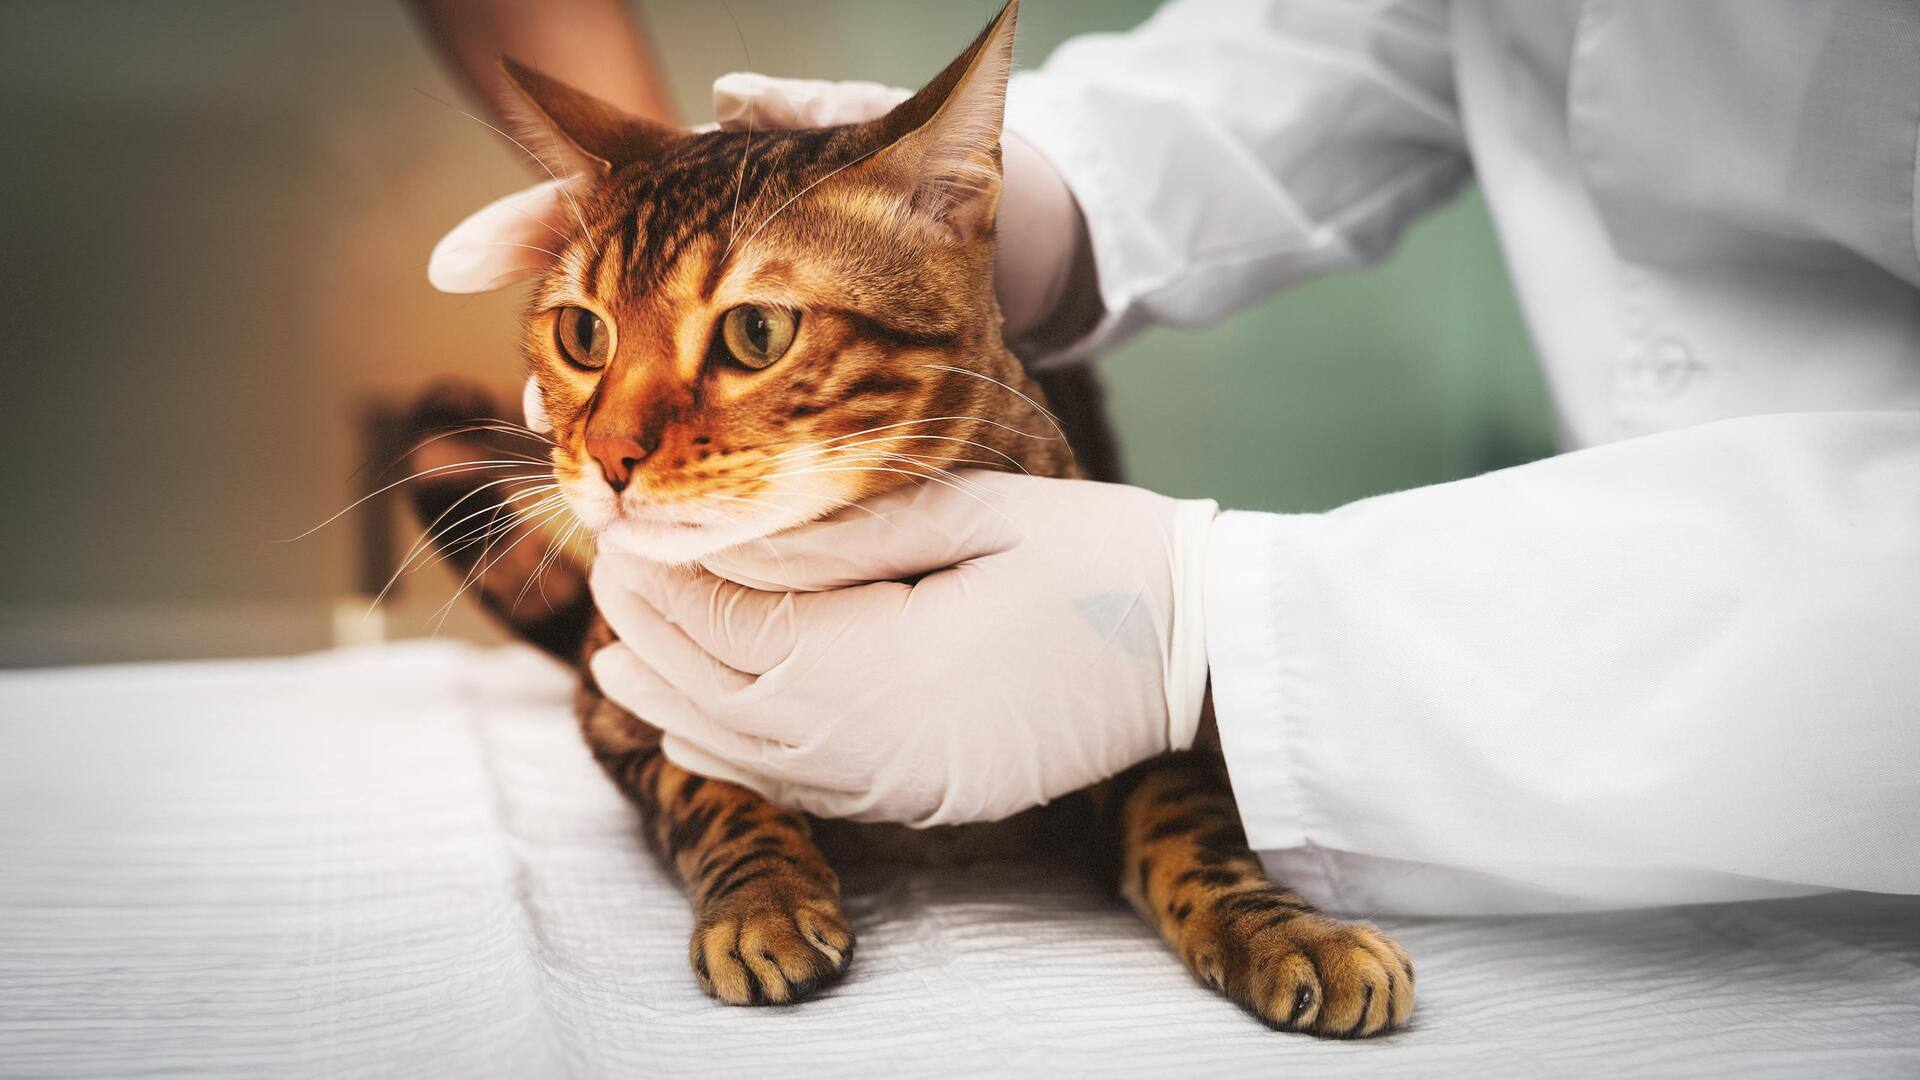 Feline Infectious Peritonitis: A cat owner's worst nightmare